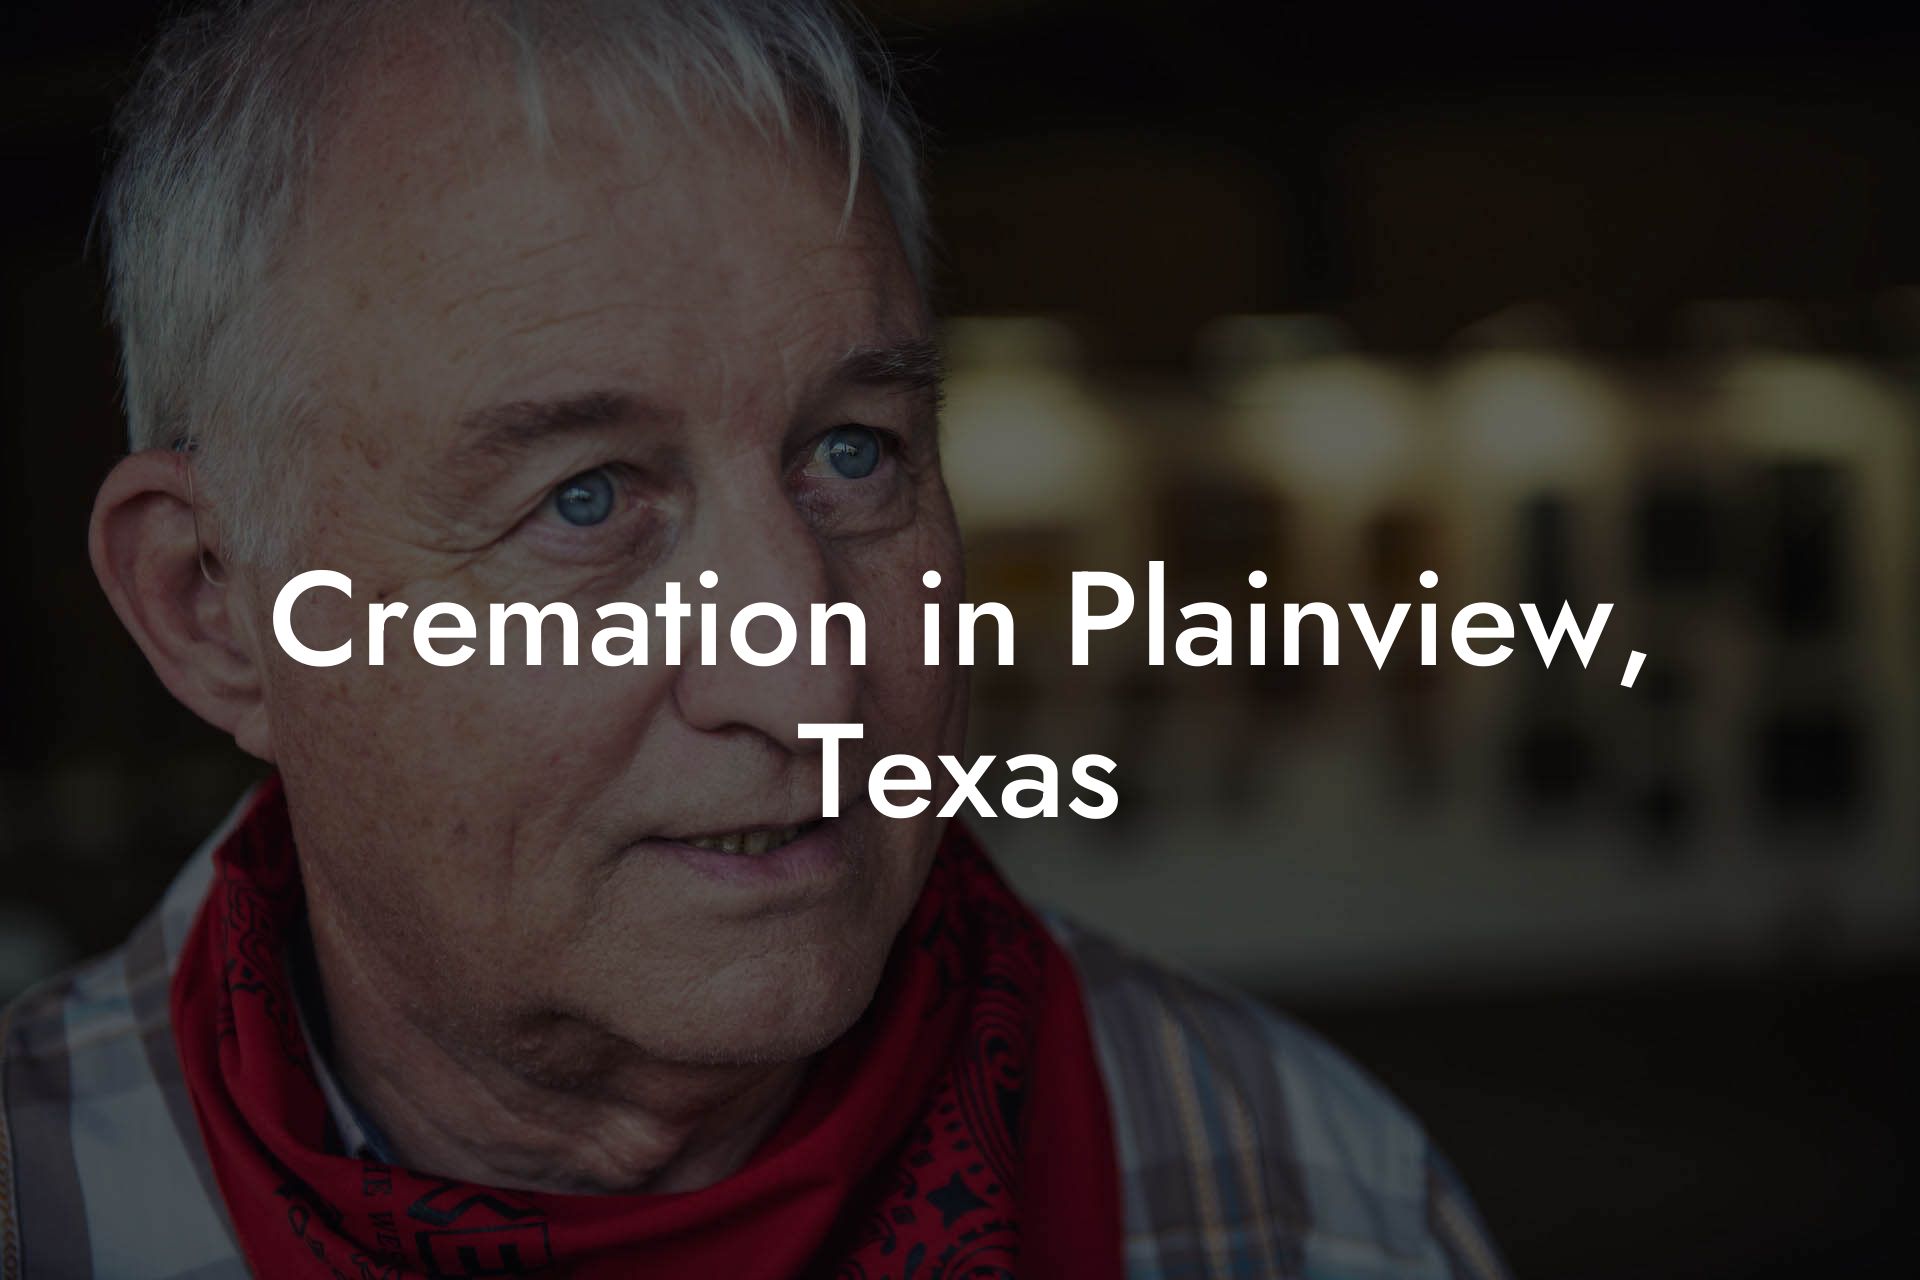 Cremation in Plainview, Texas